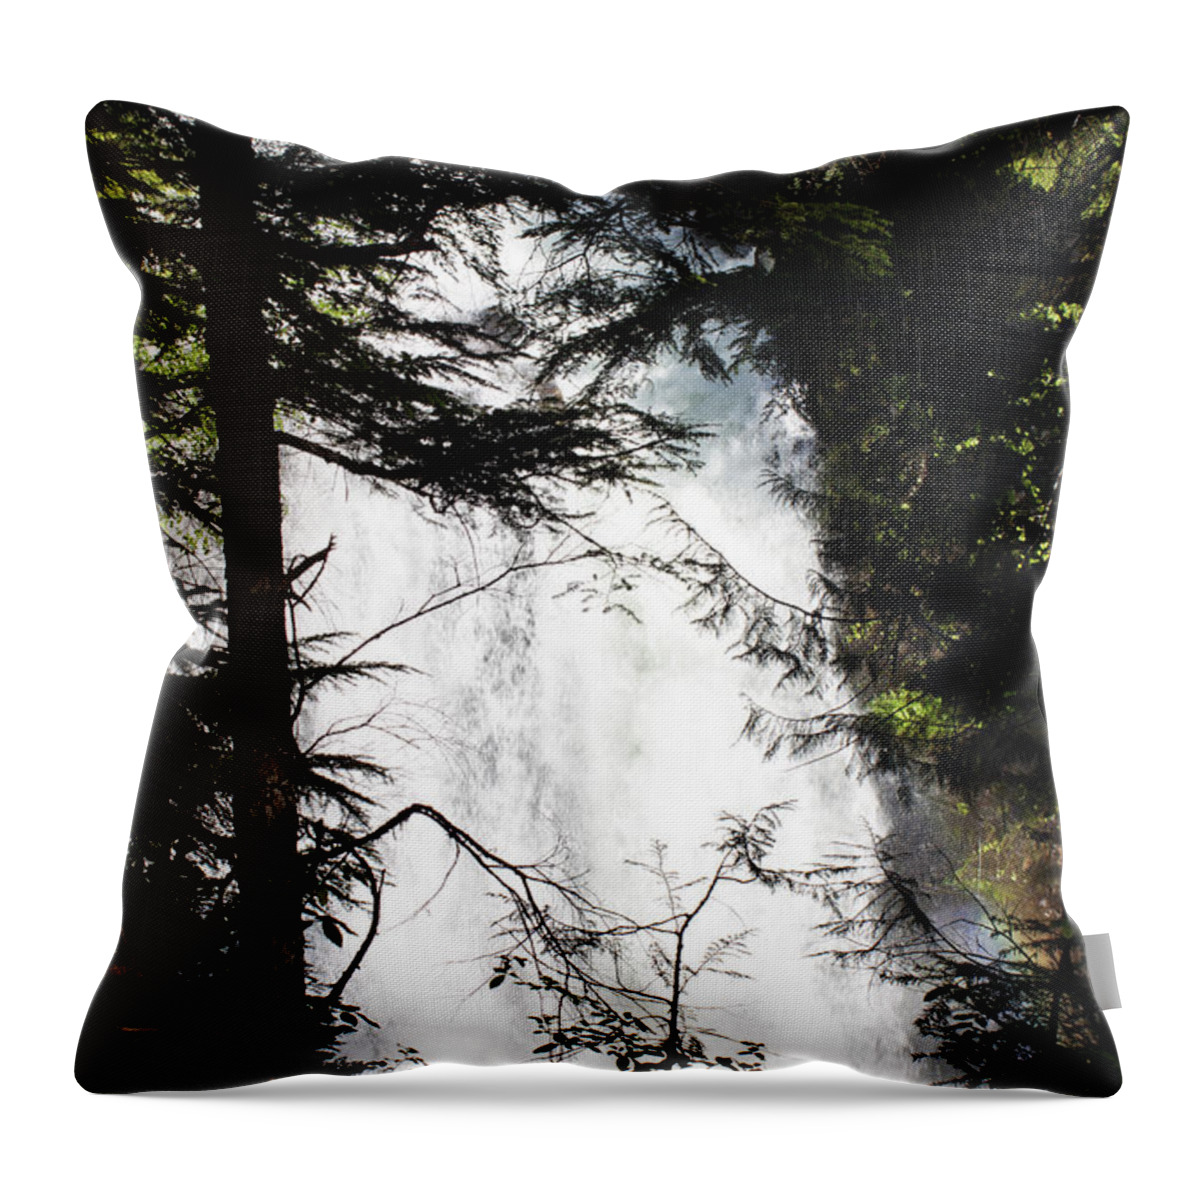 Waterfalls Throw Pillow featuring the photograph Rushing Through the Trees by Edward Hawkins II